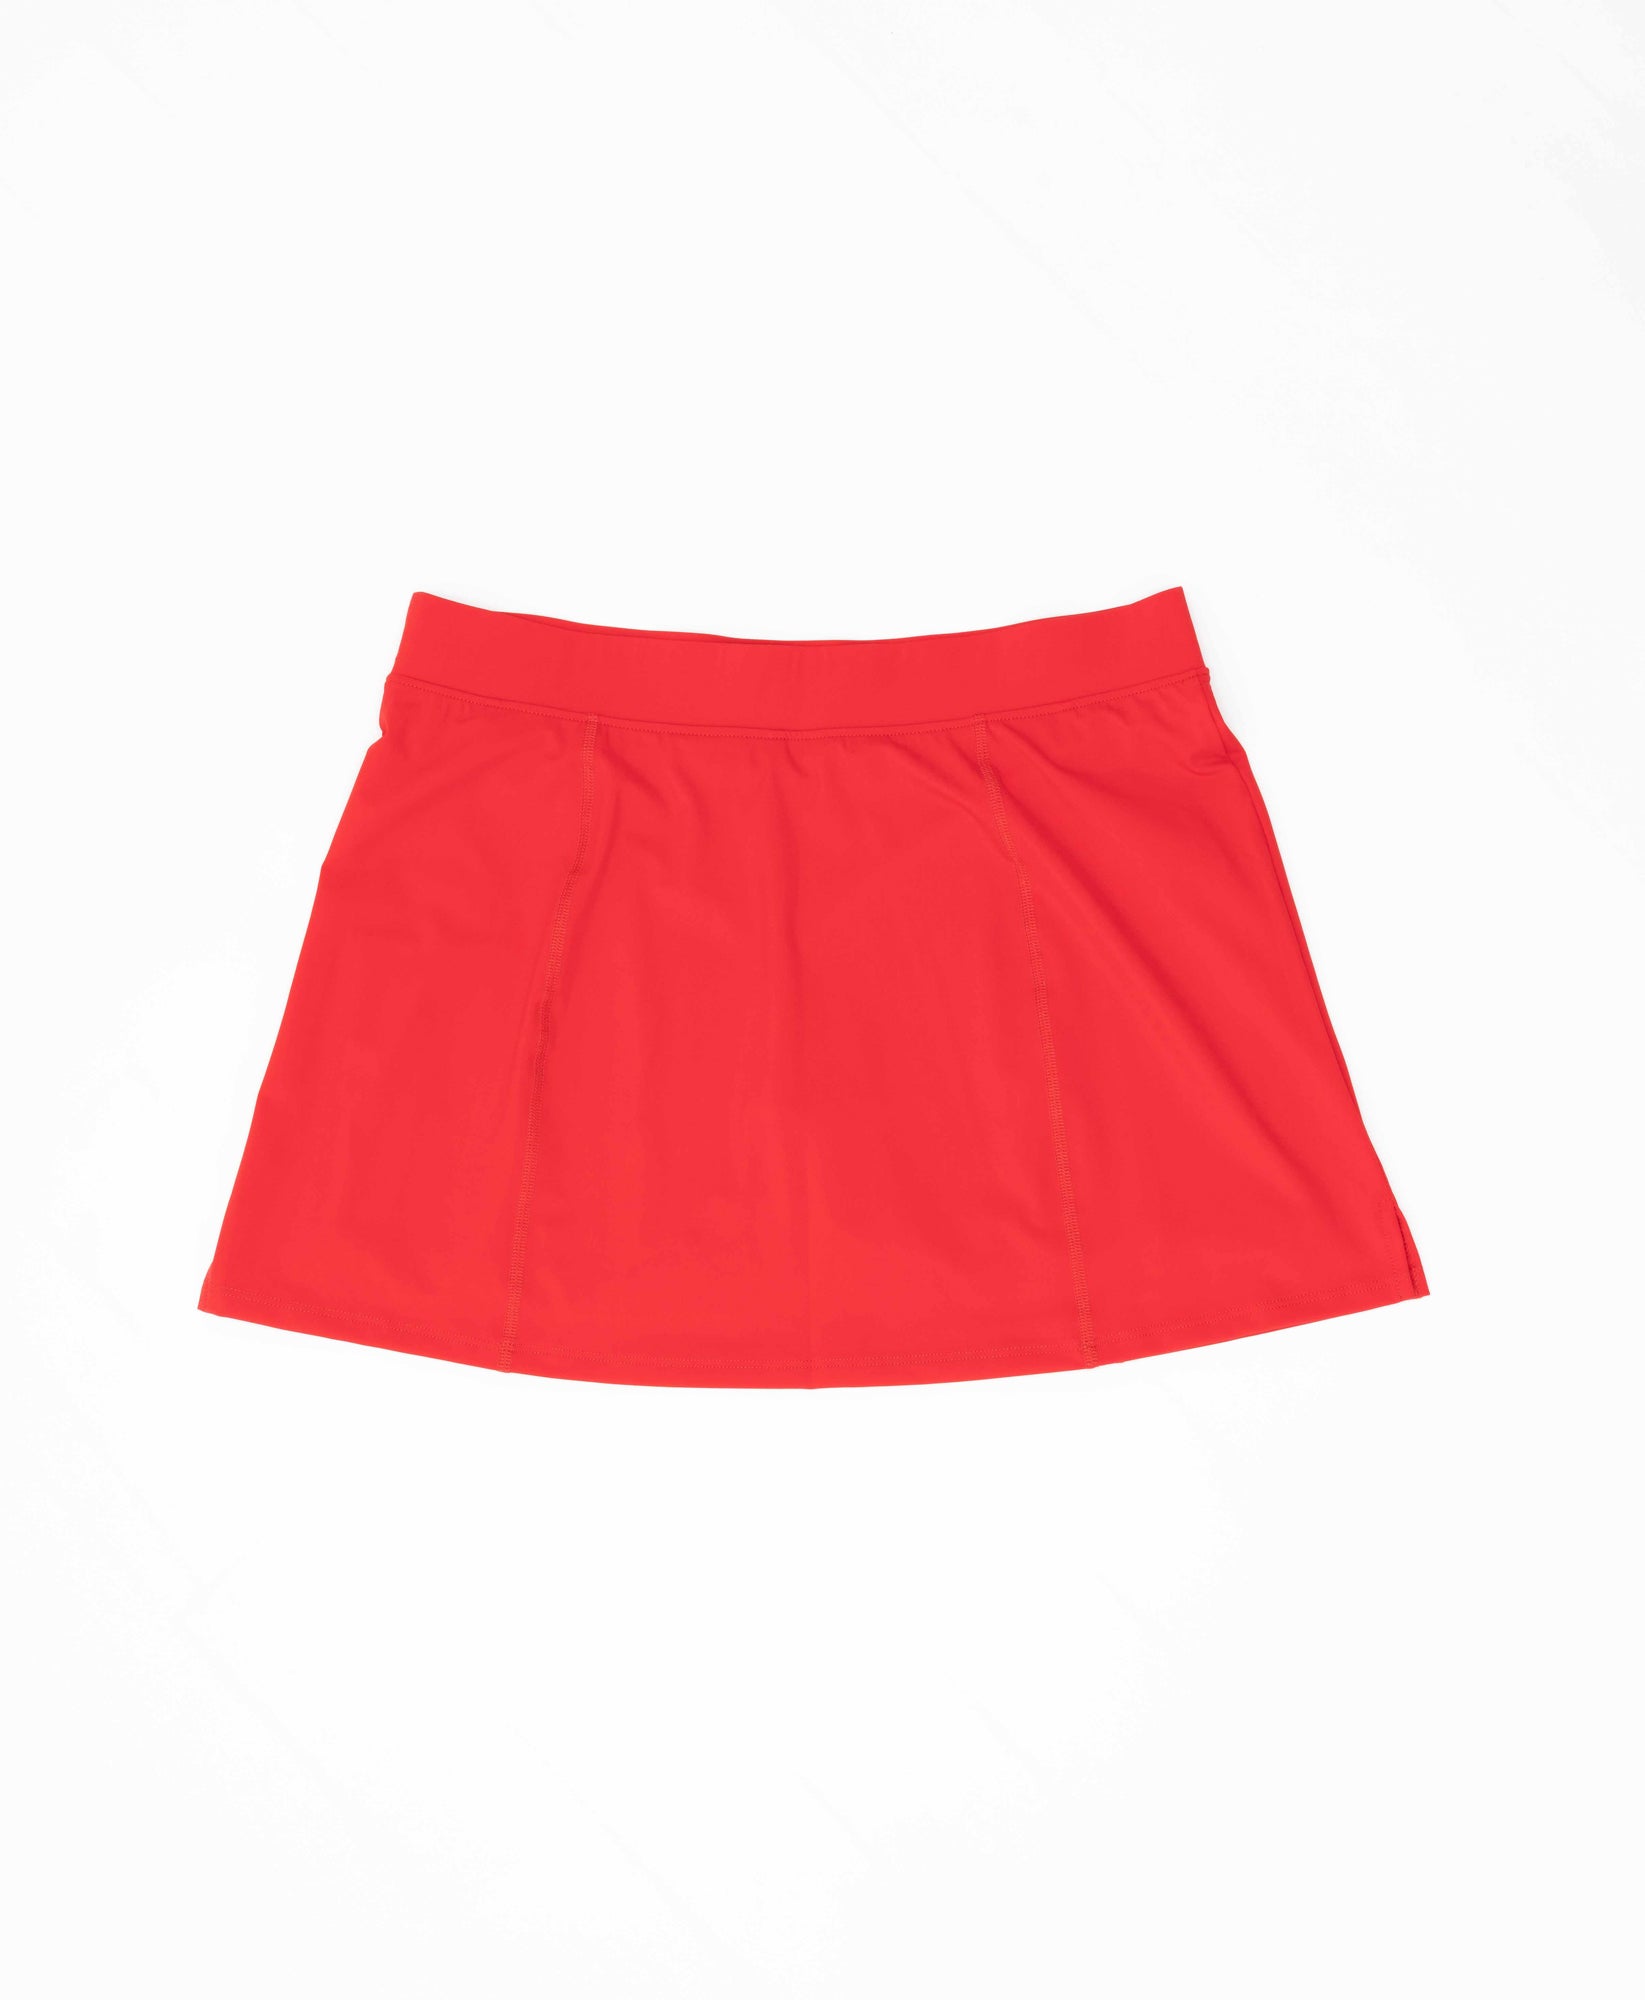 Wear One's At Simple Skort in Scarlet Red Flat Front